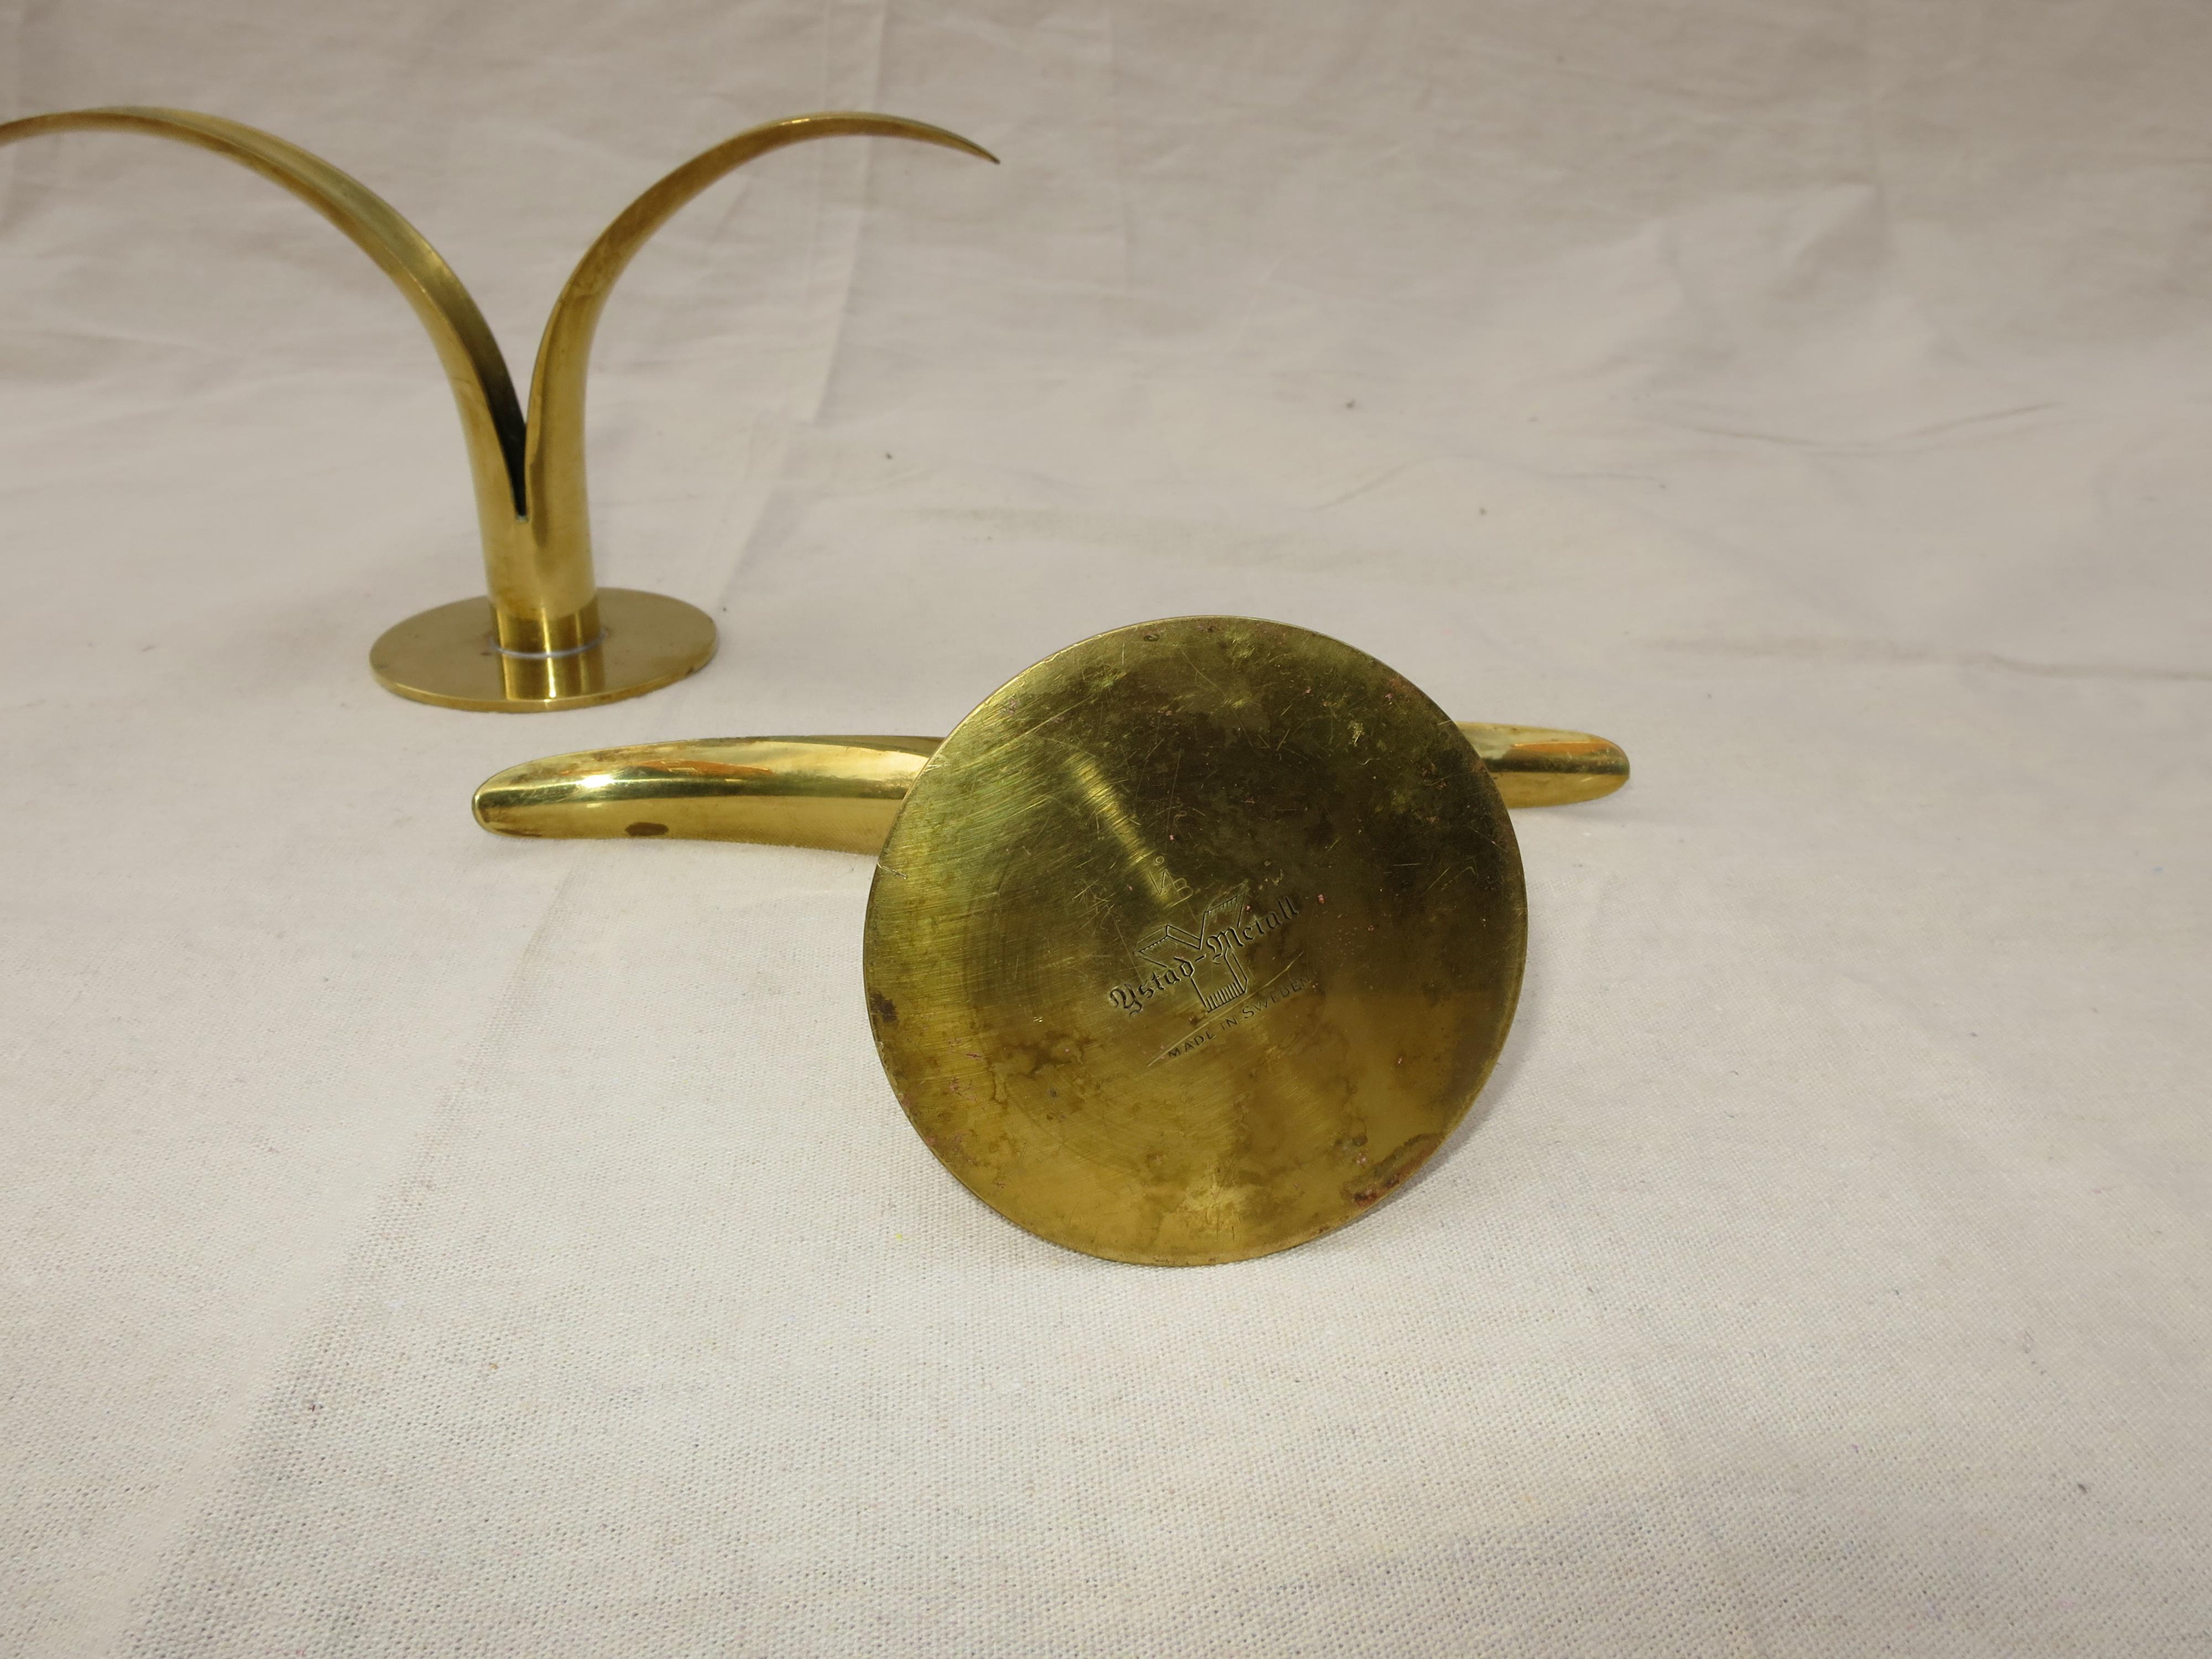 Midcentury brass candlestick holders by Ivar Alenius Bjork for Ystad Metall. Sweden.
The iconic 